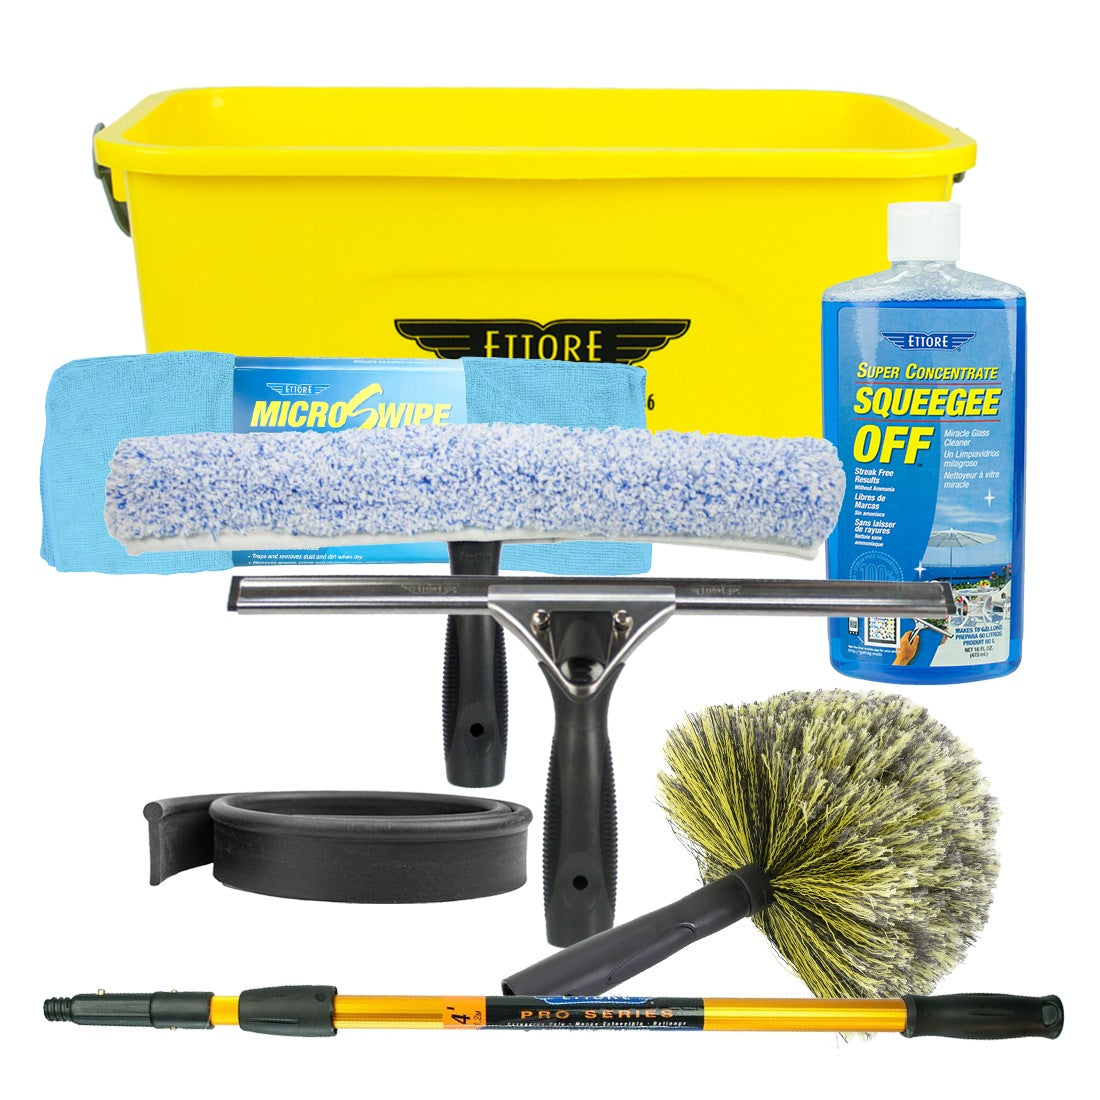 Ettore Cleaning and Dusting Kit